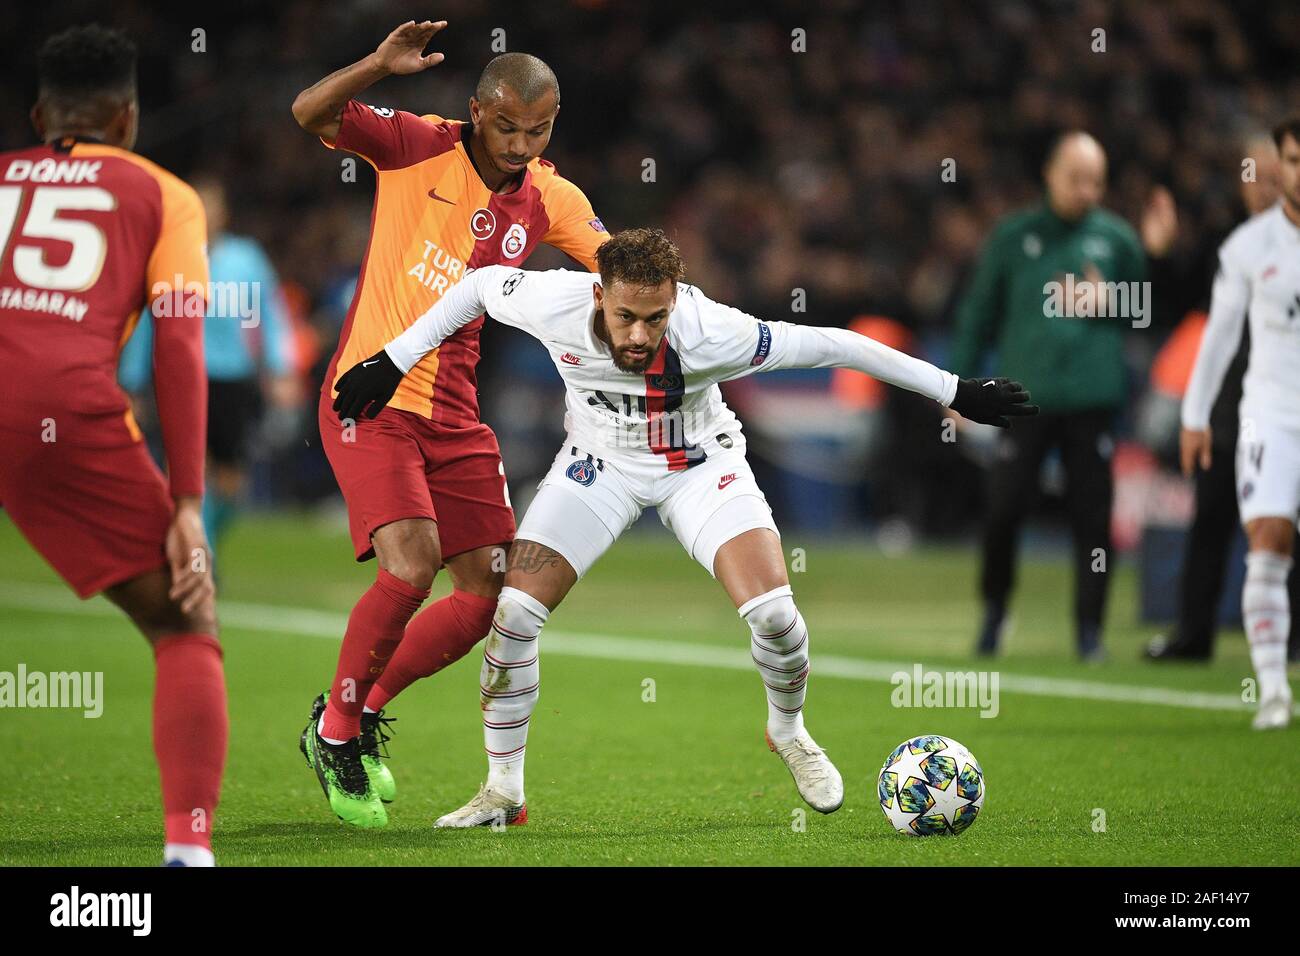 Paris, France. 11th Dec, 2019. Neymar (R) of PSG vies with Mariano Ferreira  of Galatasaray during a Group A match of the 2019-2020 UEFA Champions League  between Paris Saint-Germain (PSG) and Galatasaray